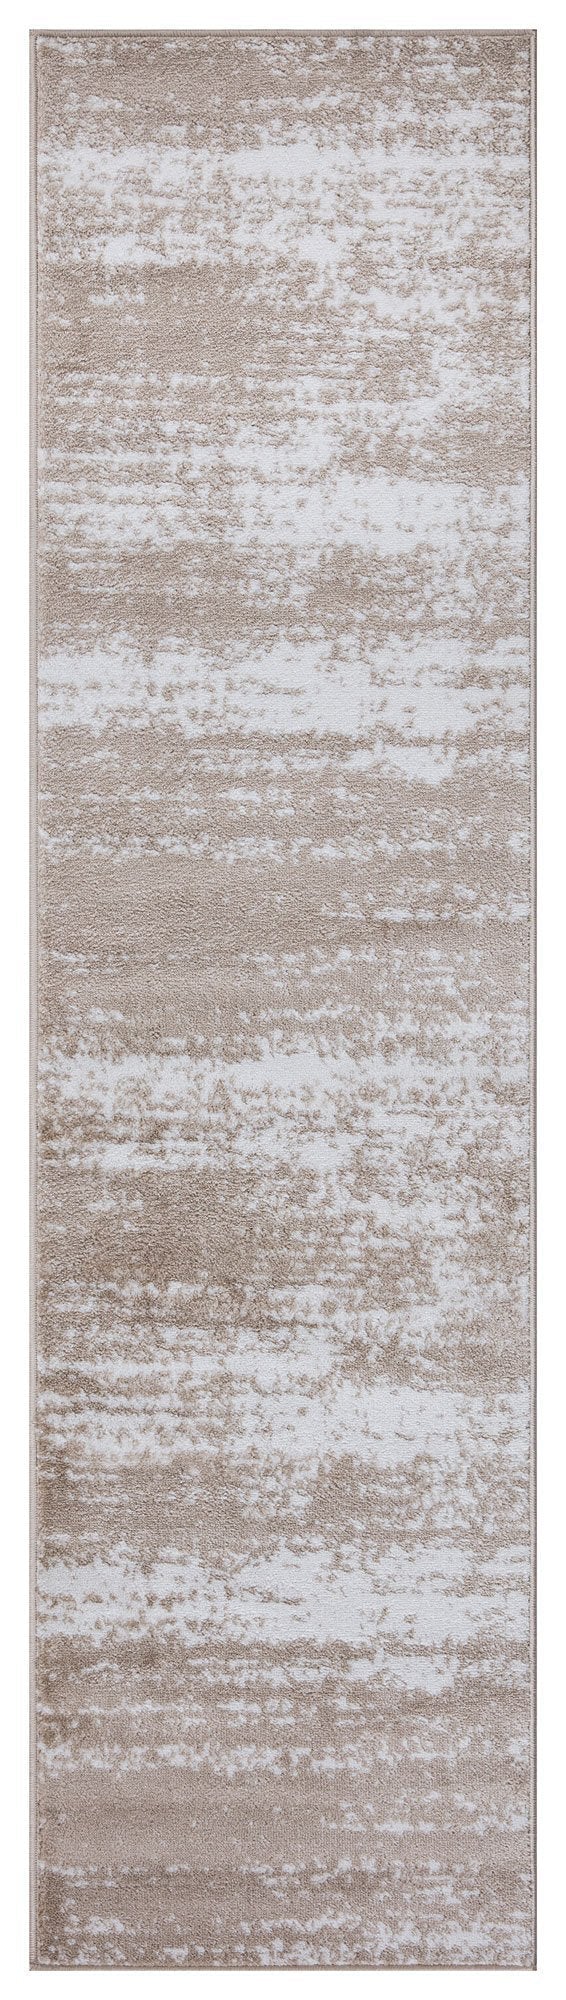 Palma 1787 Beige Area Rug The Rugs Outlet